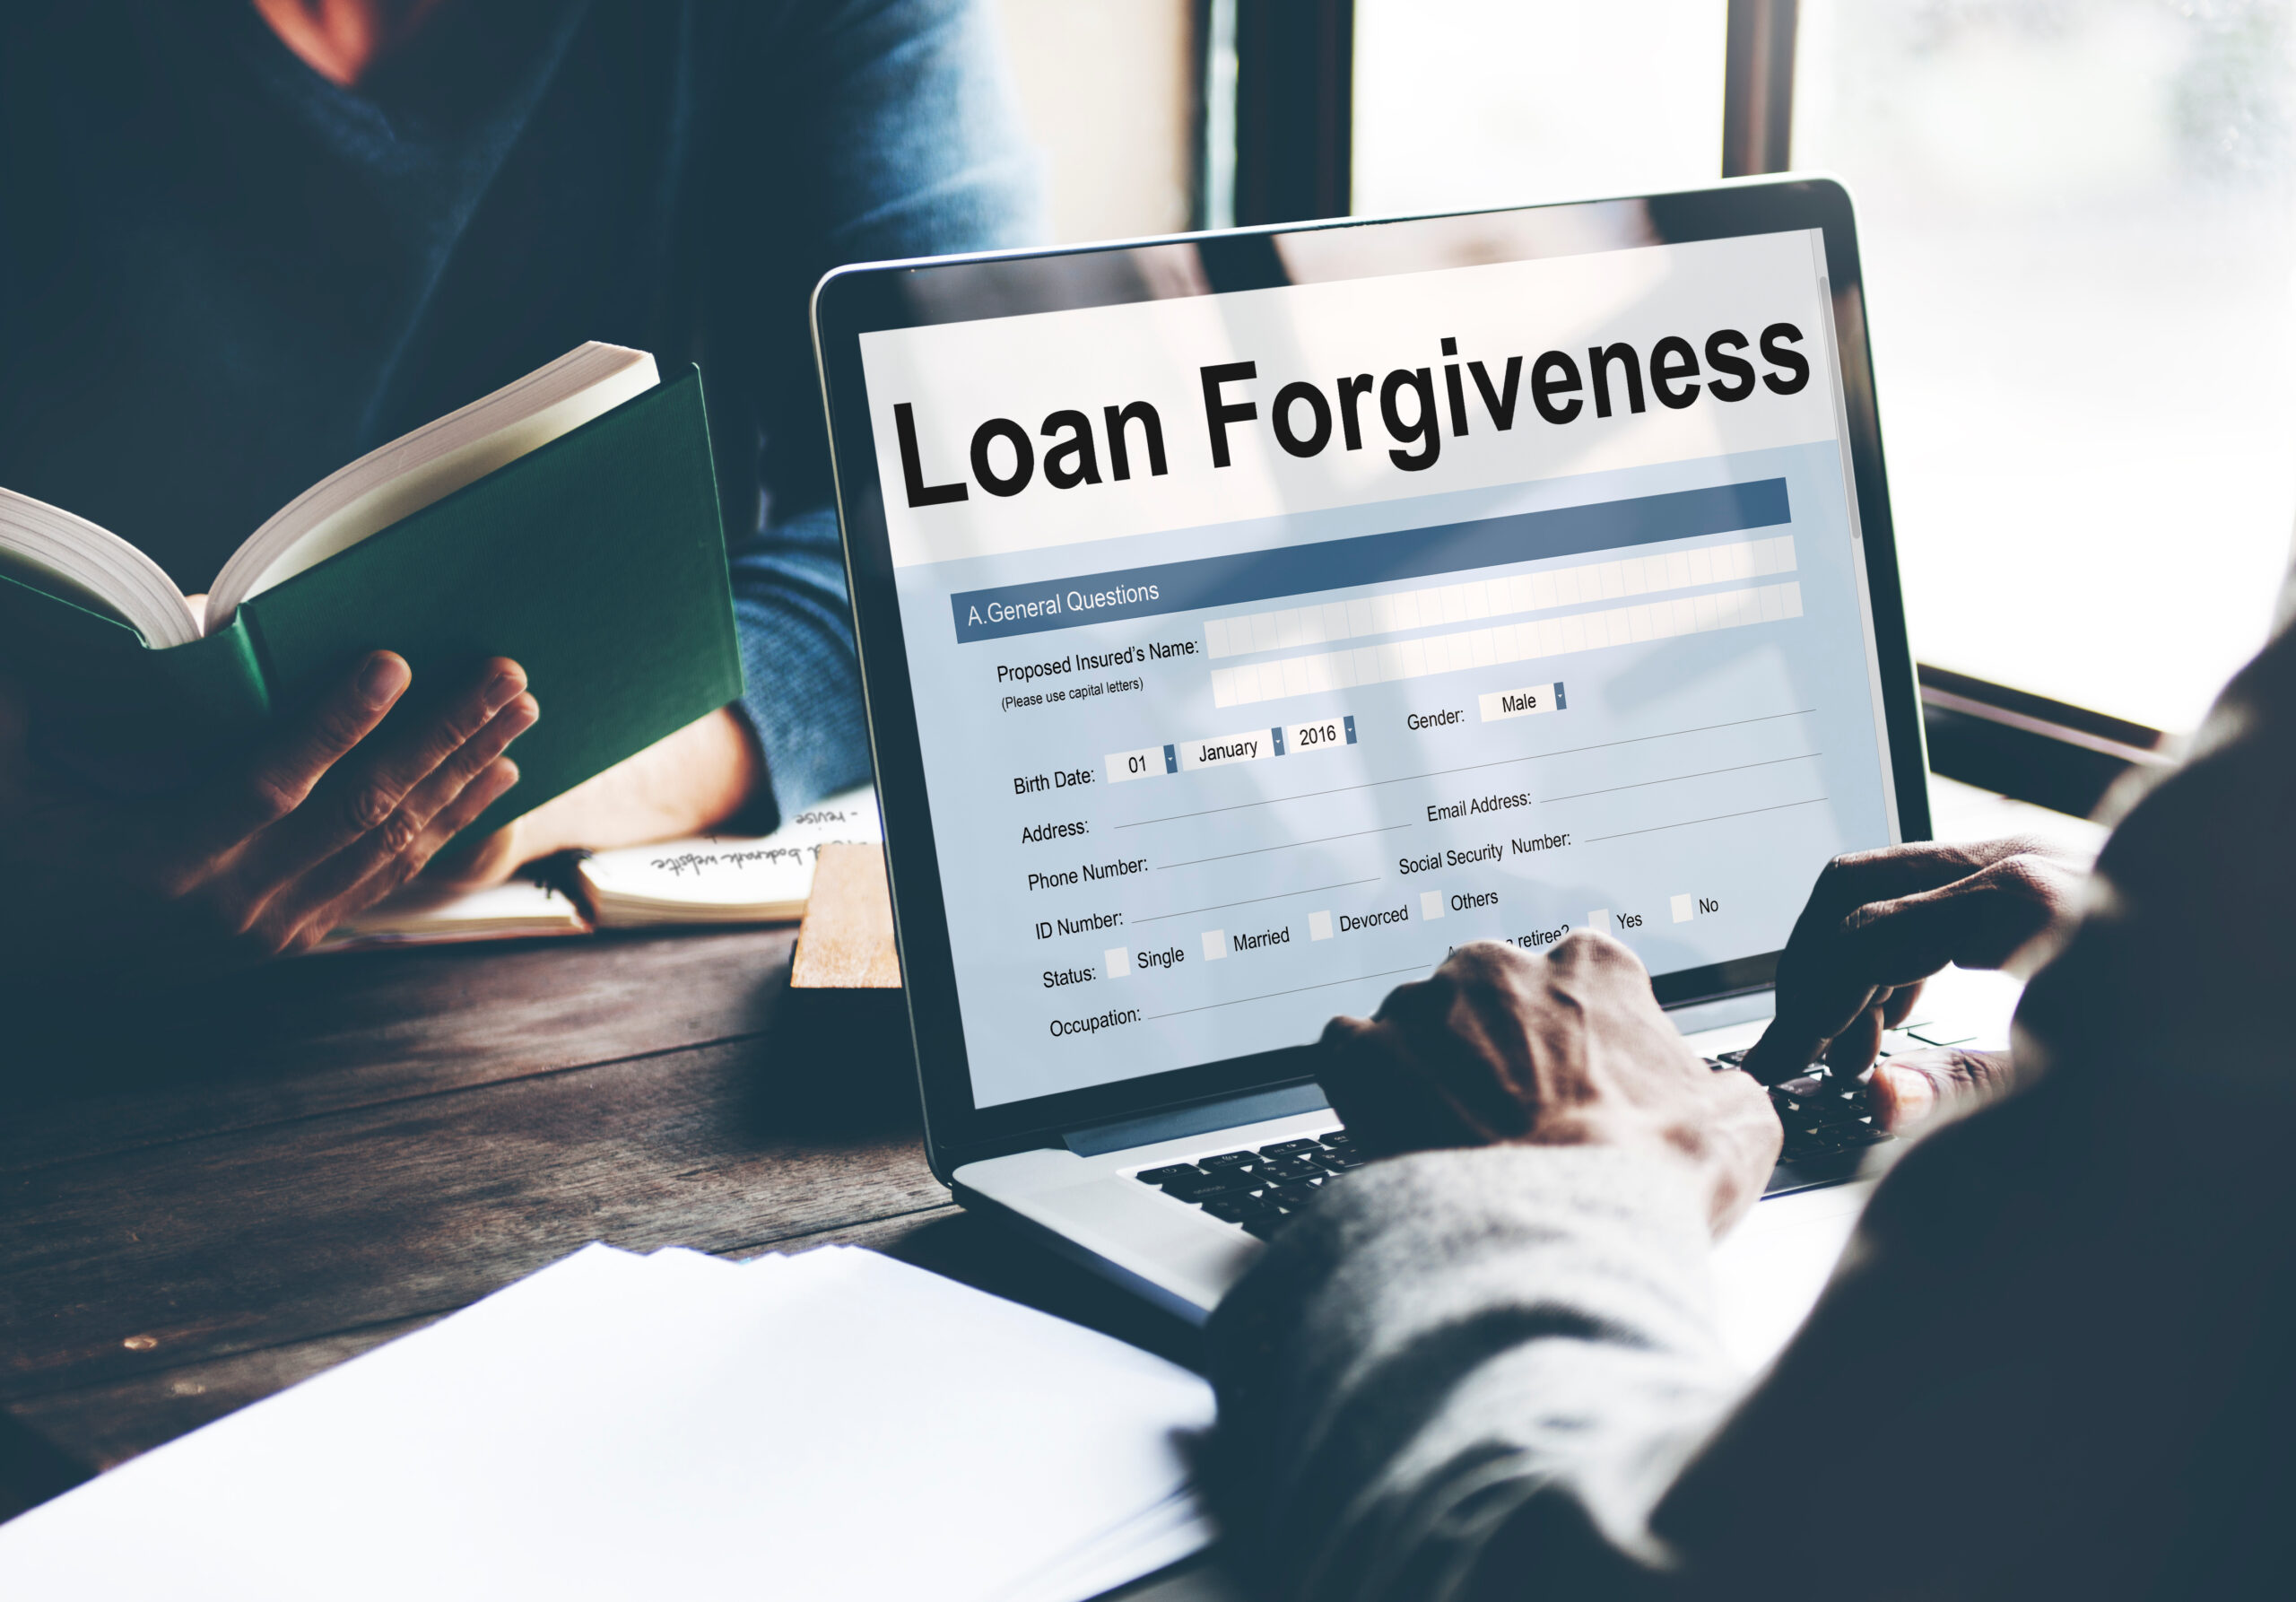 A person sits at an open laptop typing, LOAN FORGIVENESS is written across the top of the screen